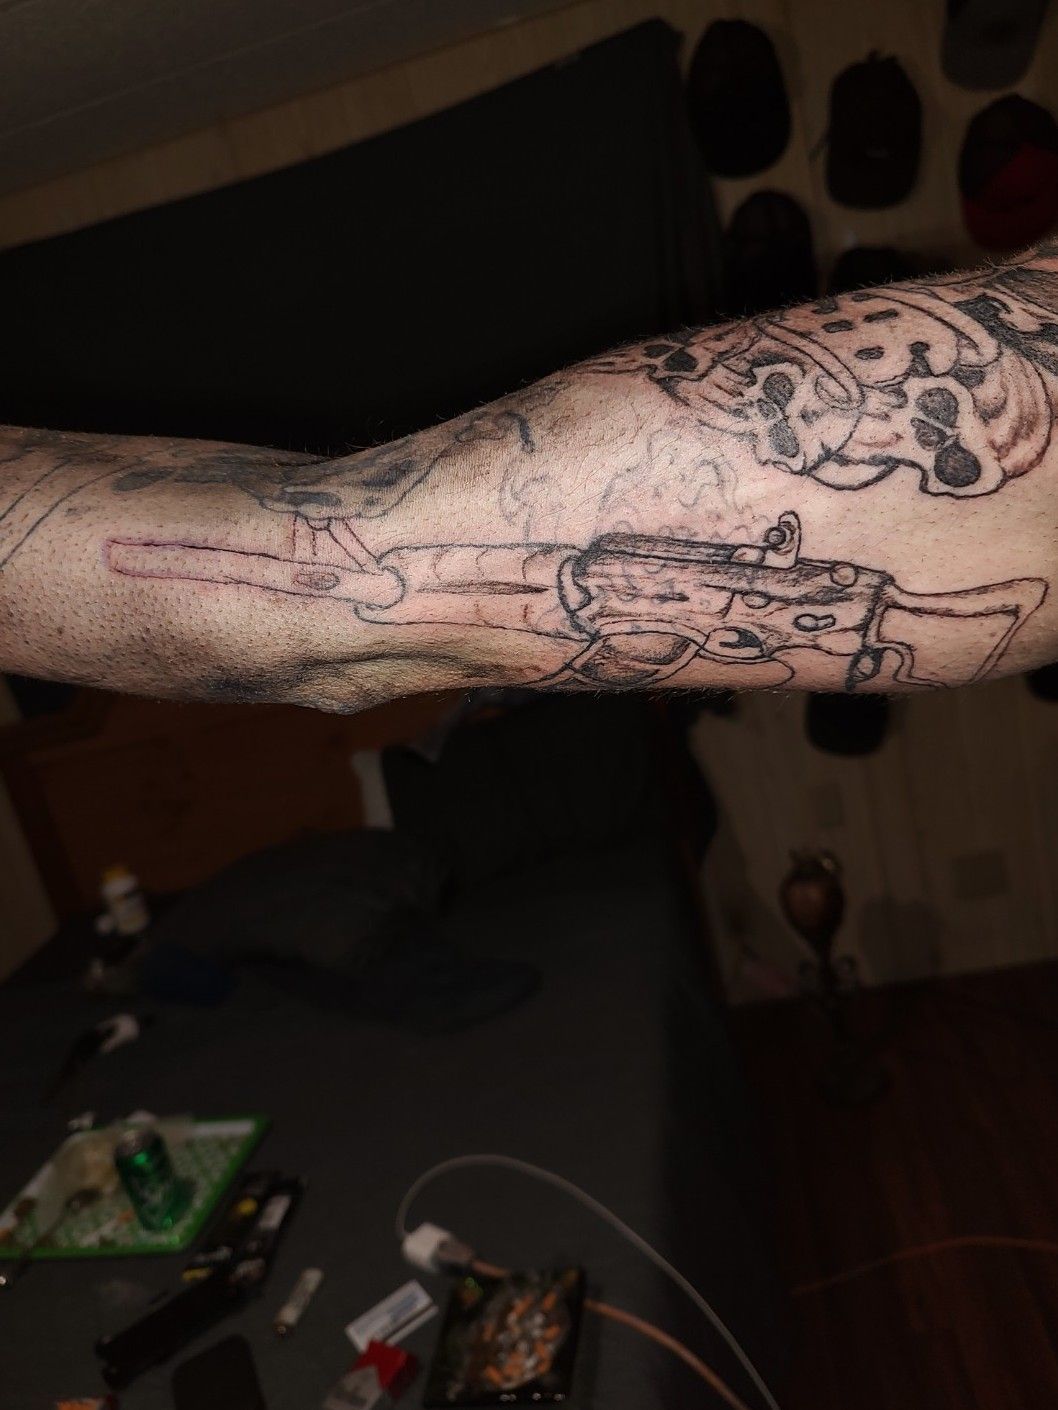 Tattoo uploaded by Ross Howerton • A portrait of everyone's favorite sniper  rifle, the AWP, by Deaw (IG—sungallerytattoo). #AWP #CounterStrike #CSGO  #Deaw • Tattoodo